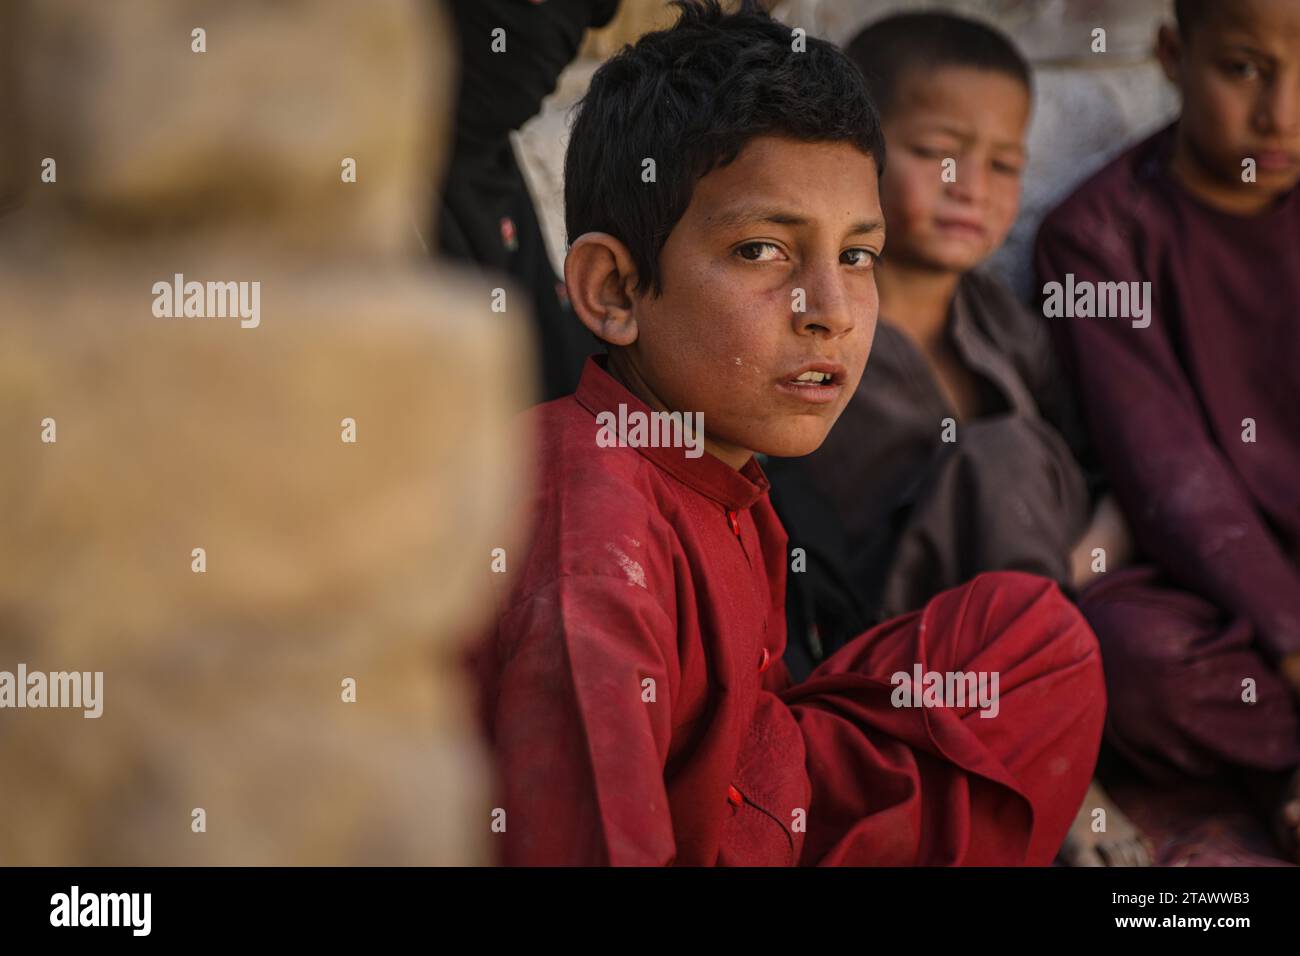 Needy refugee children in a dire situation seeking assistance | Refugee children in need, looking for help in a difficult situation. Stock Photo